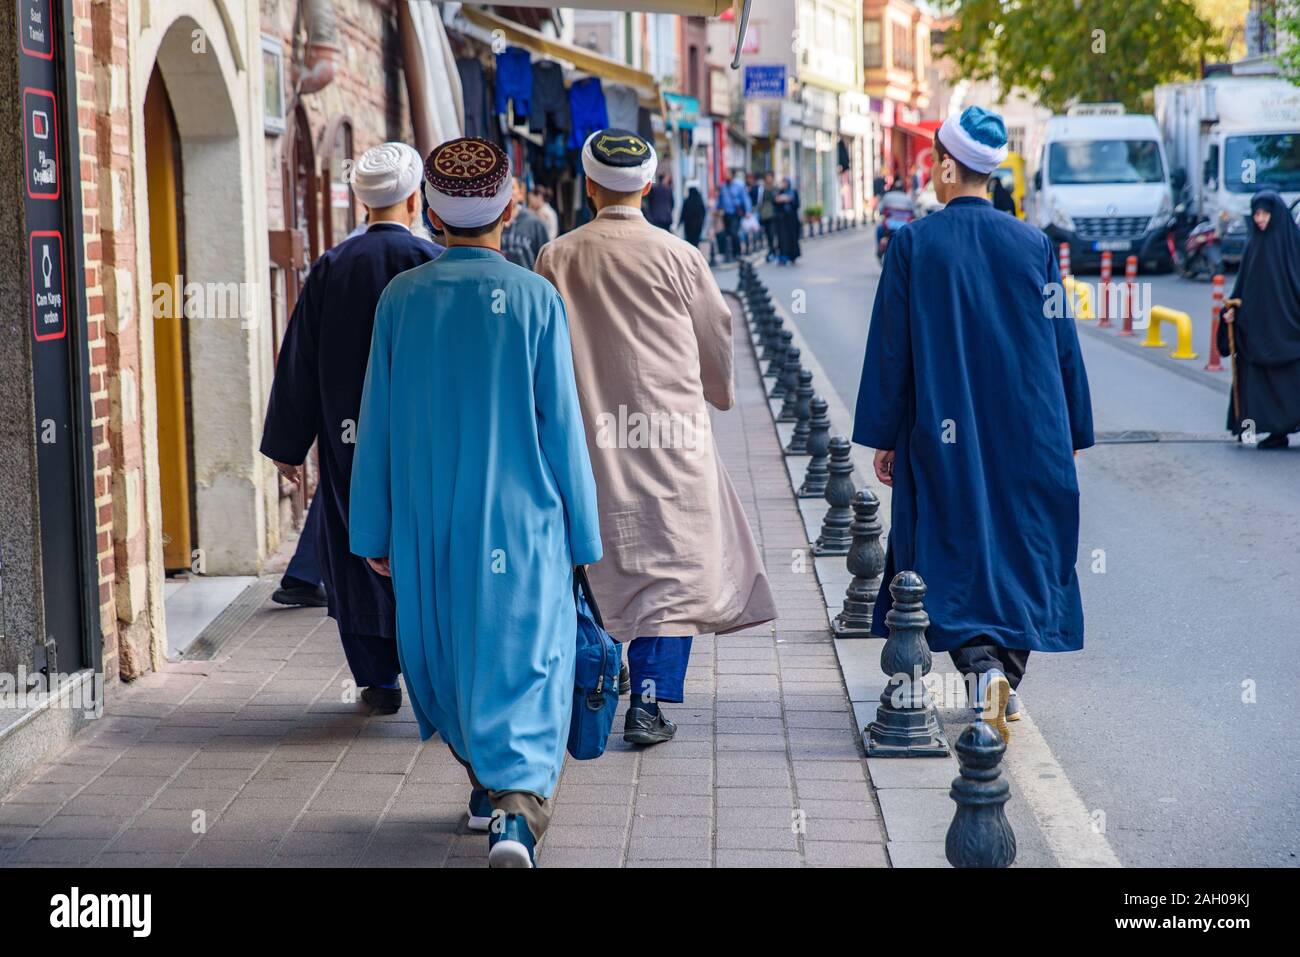 Men with traditional clothes walking on street in Istanbul, Turkey Stock Photo